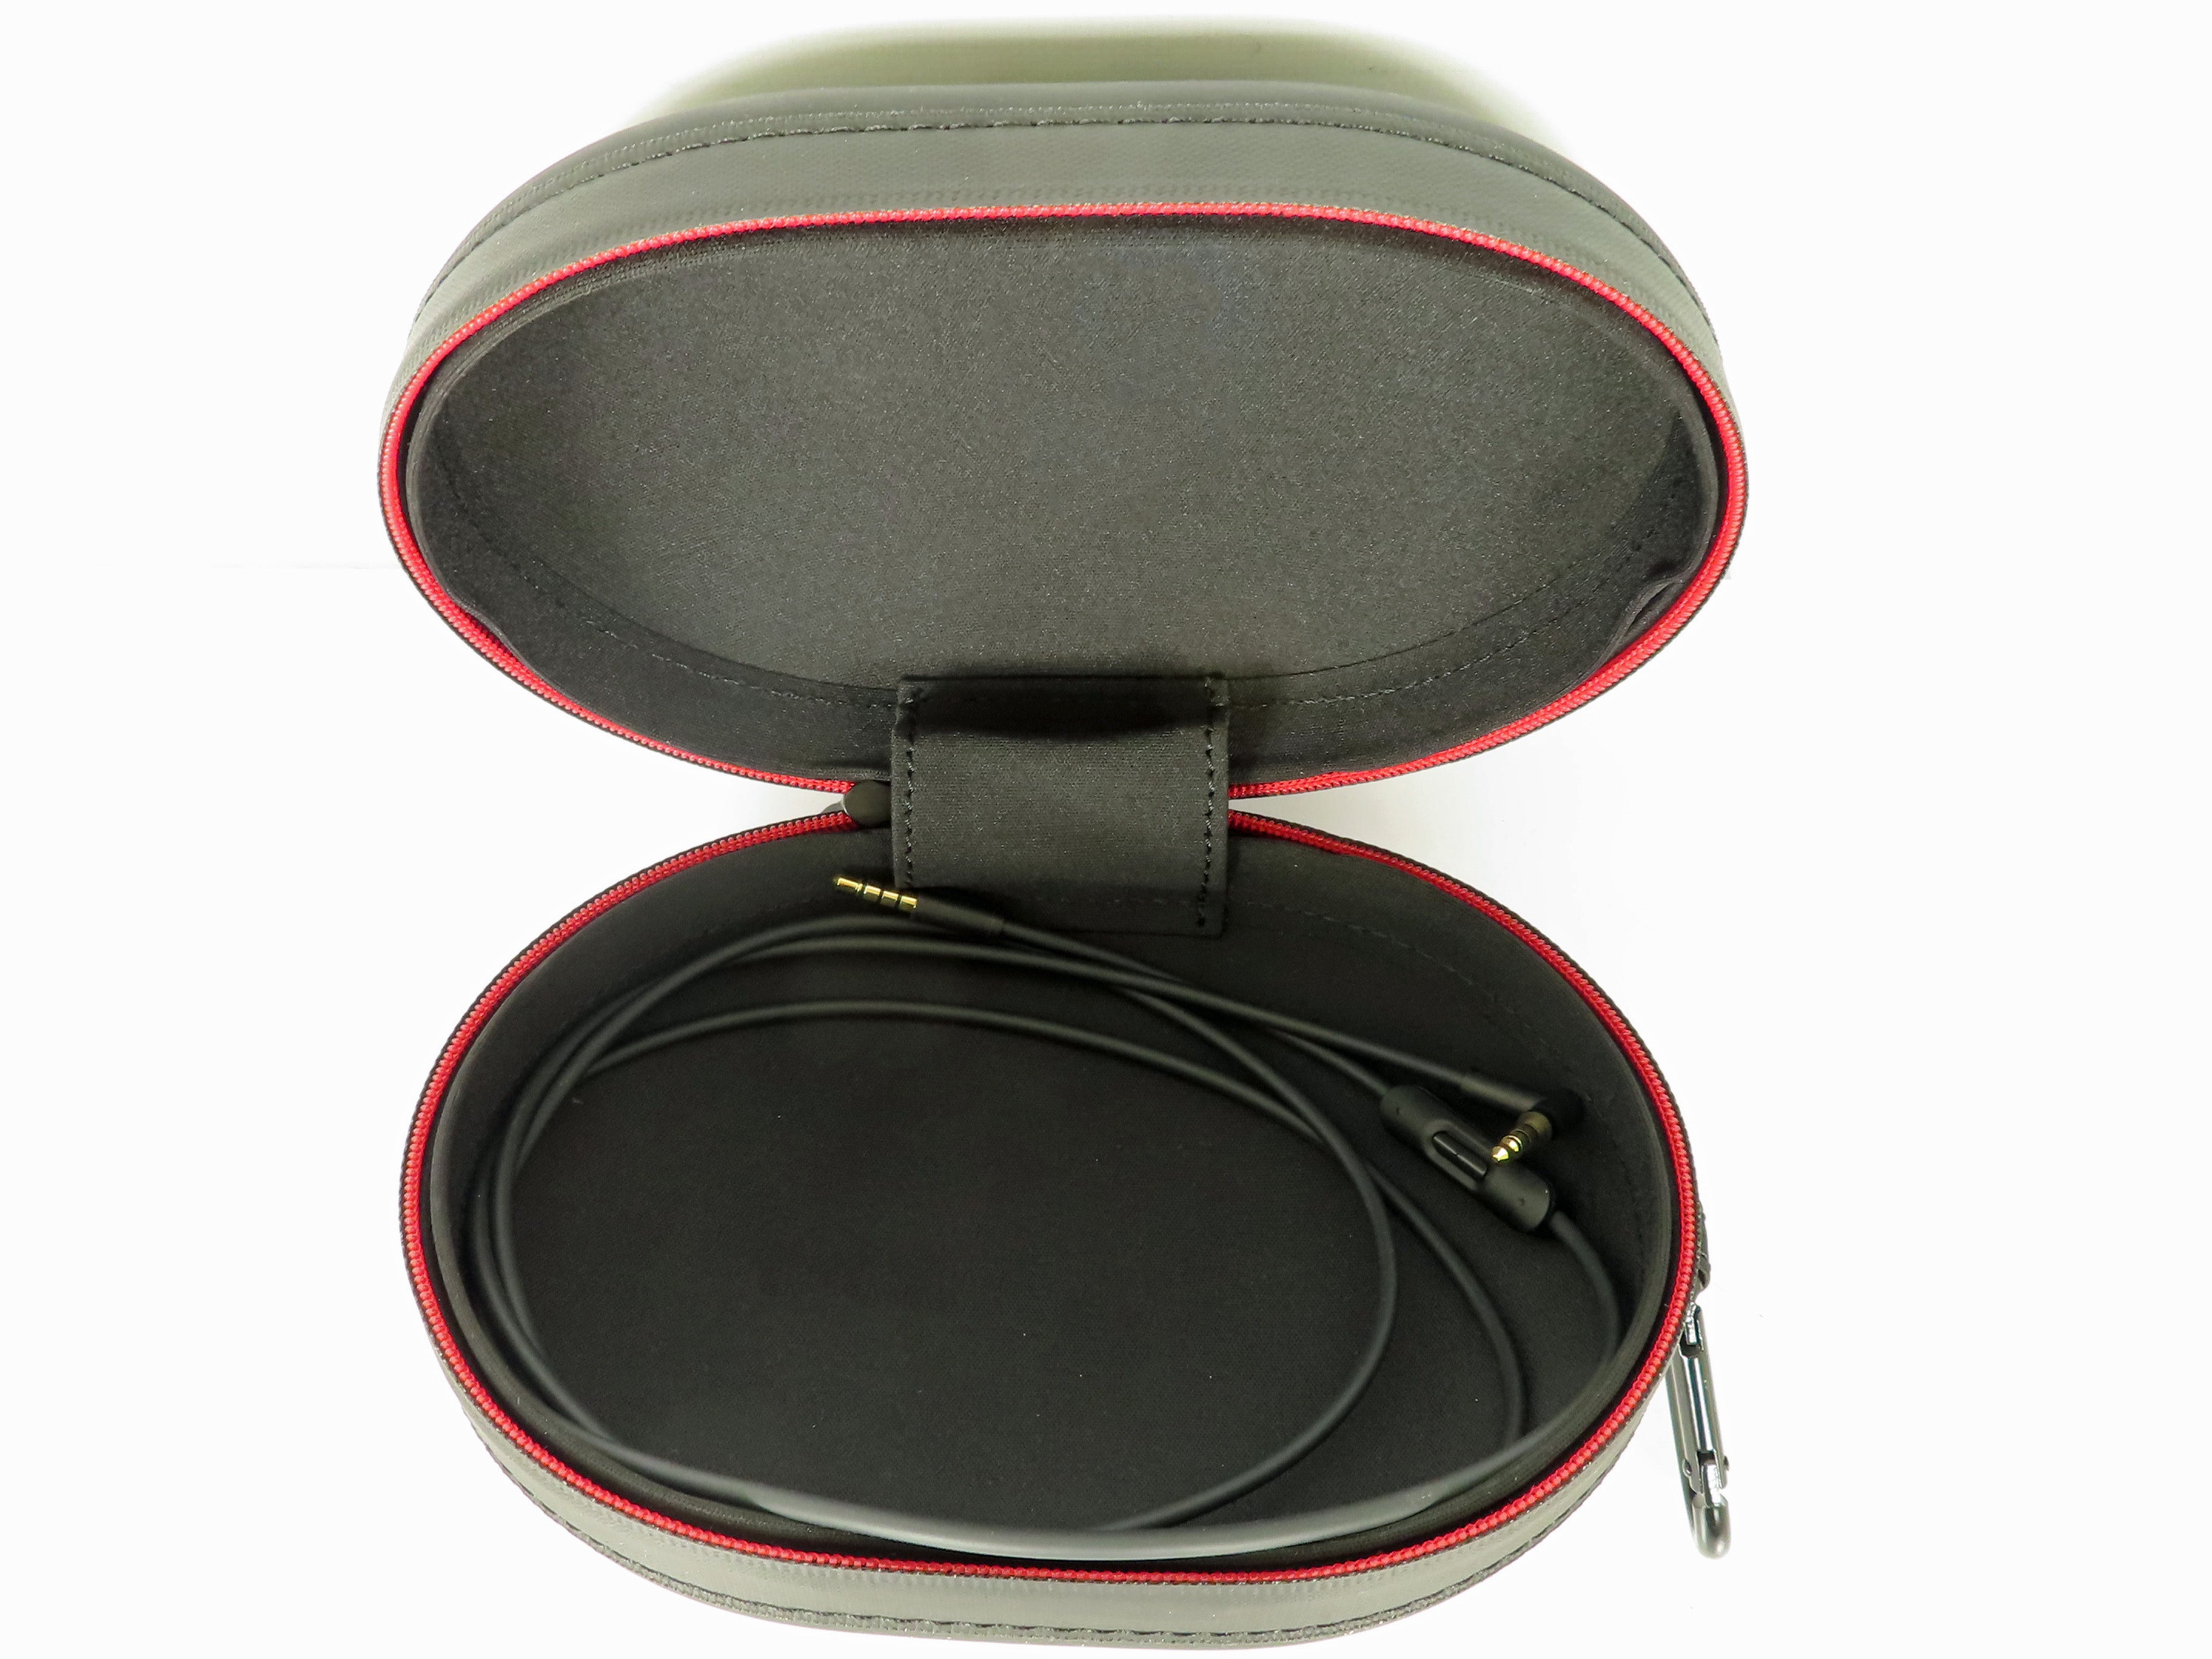 Beats by Dre Large Over-the-Ear Headphones Black/Red Zipper Case Only with Aux Cable